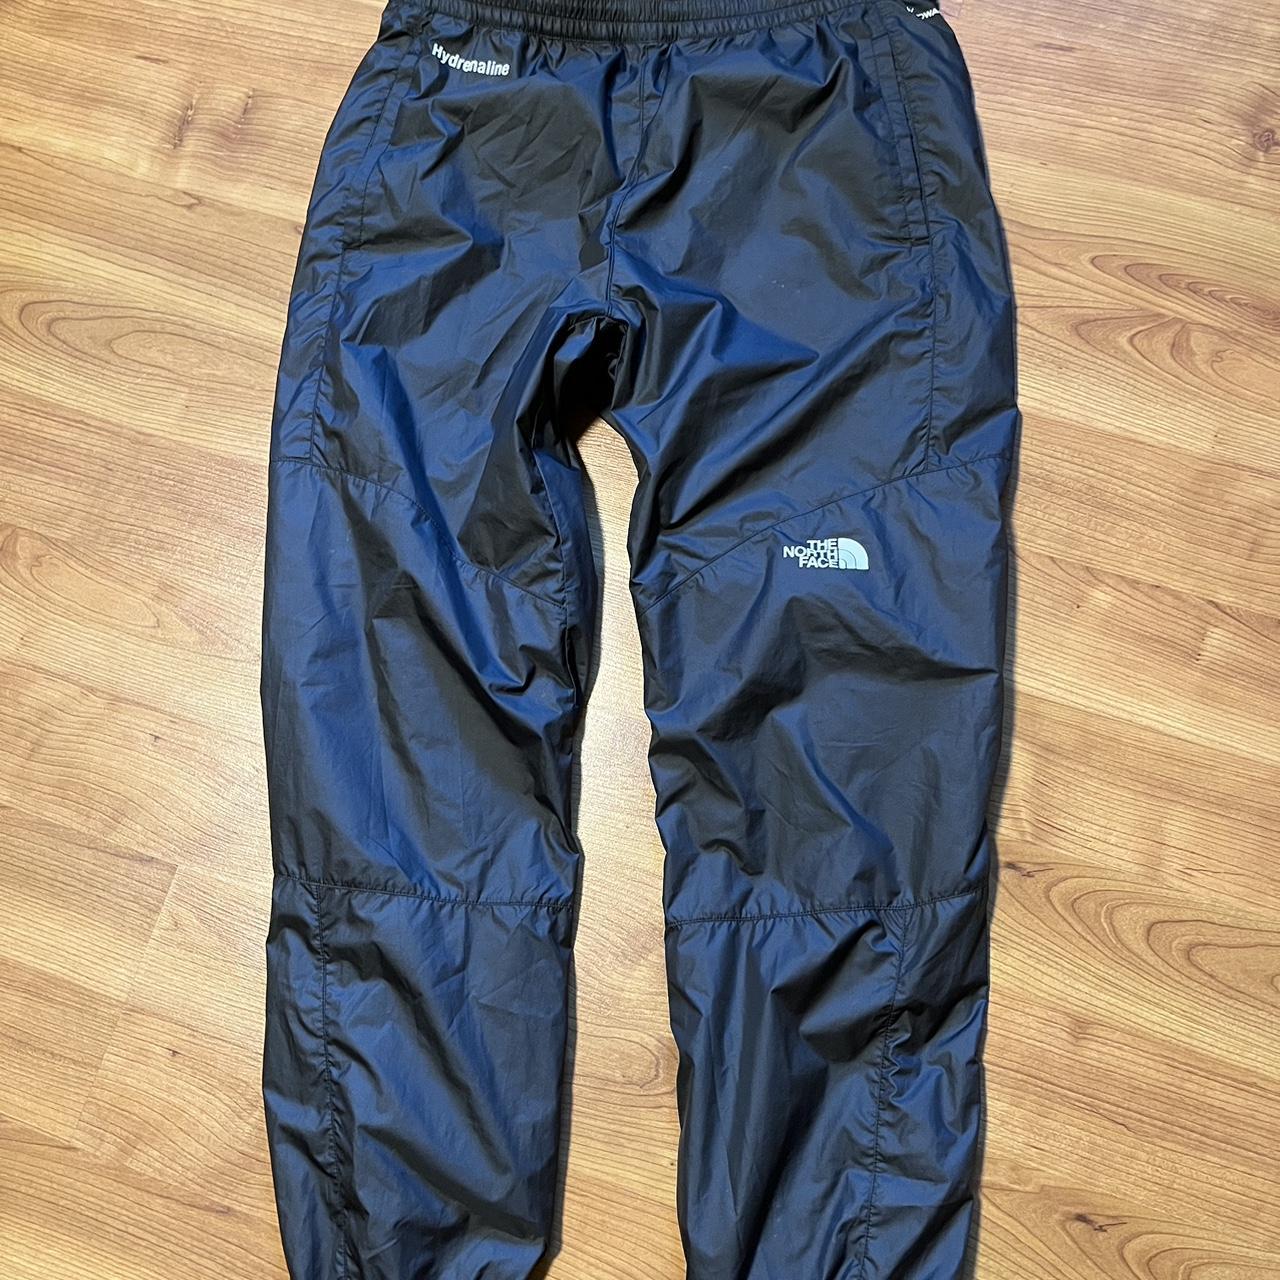 Black Paramount Pro Convertible Trousers by The North Face on Sale